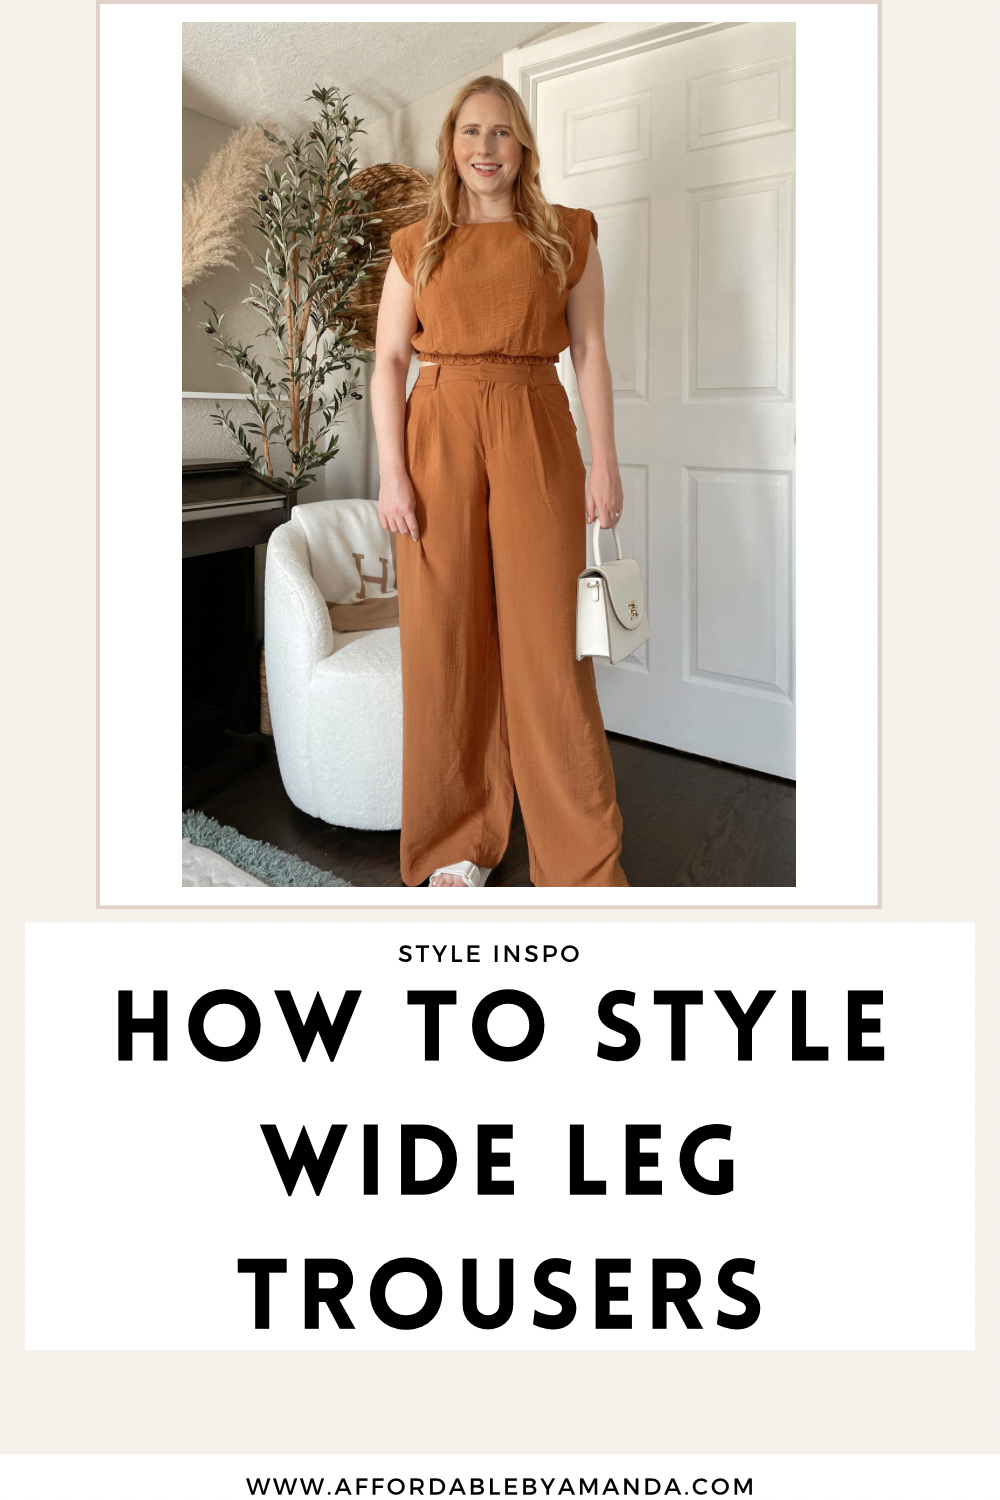 HOW TO STYLE WIDE LEG PANTS FOR SHORT GIRL - YouTube